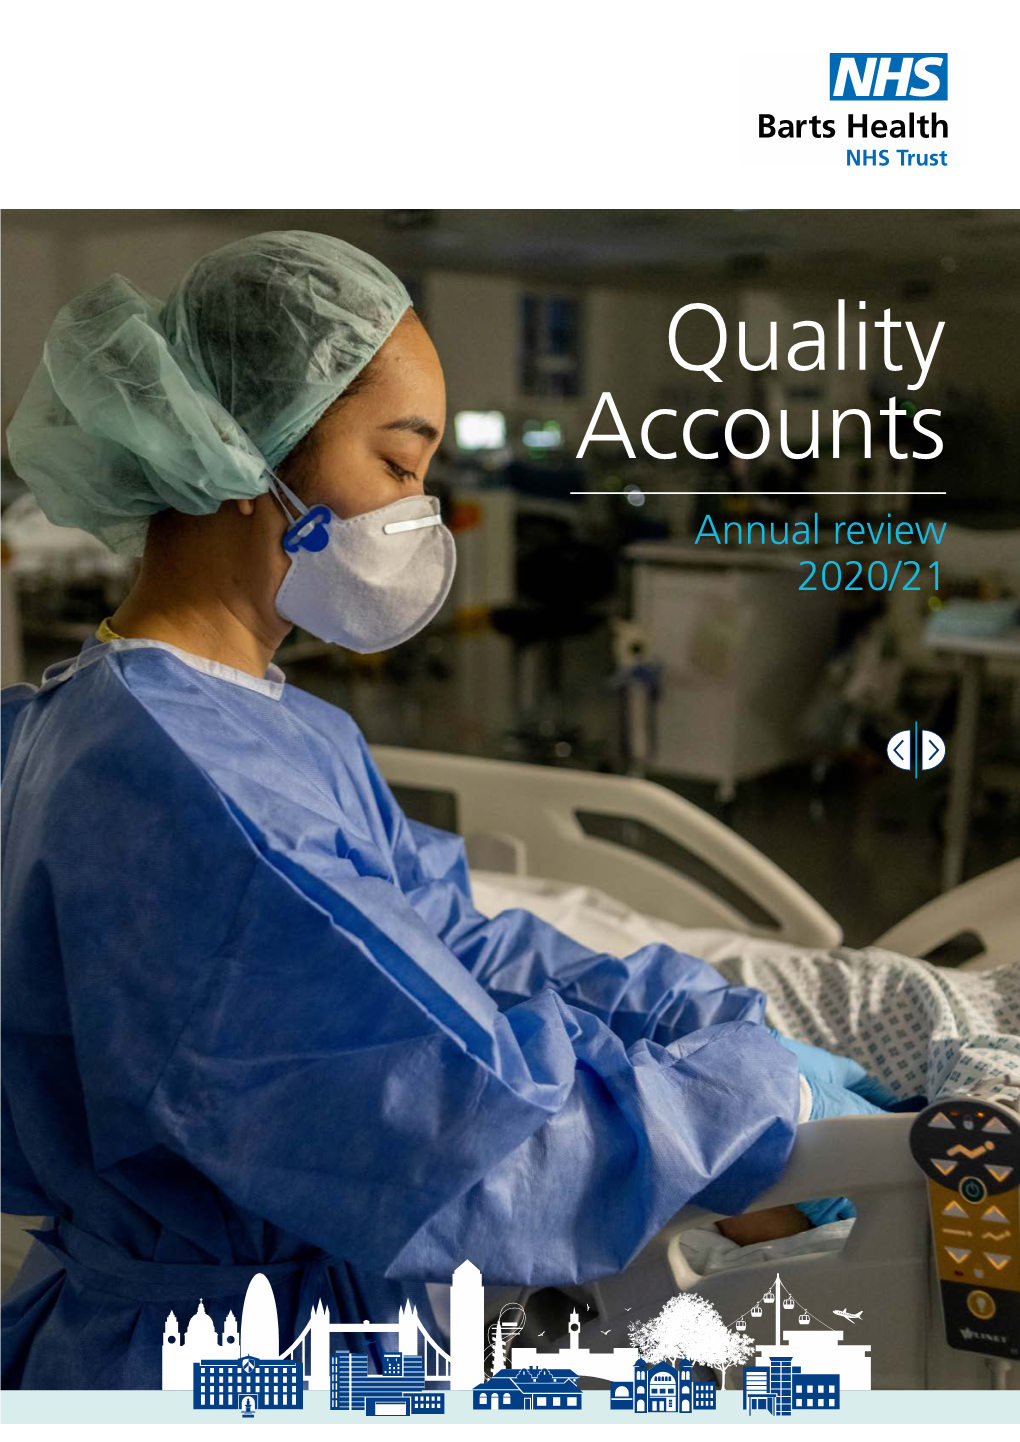 Quality Accounts Annual Review 2020/21